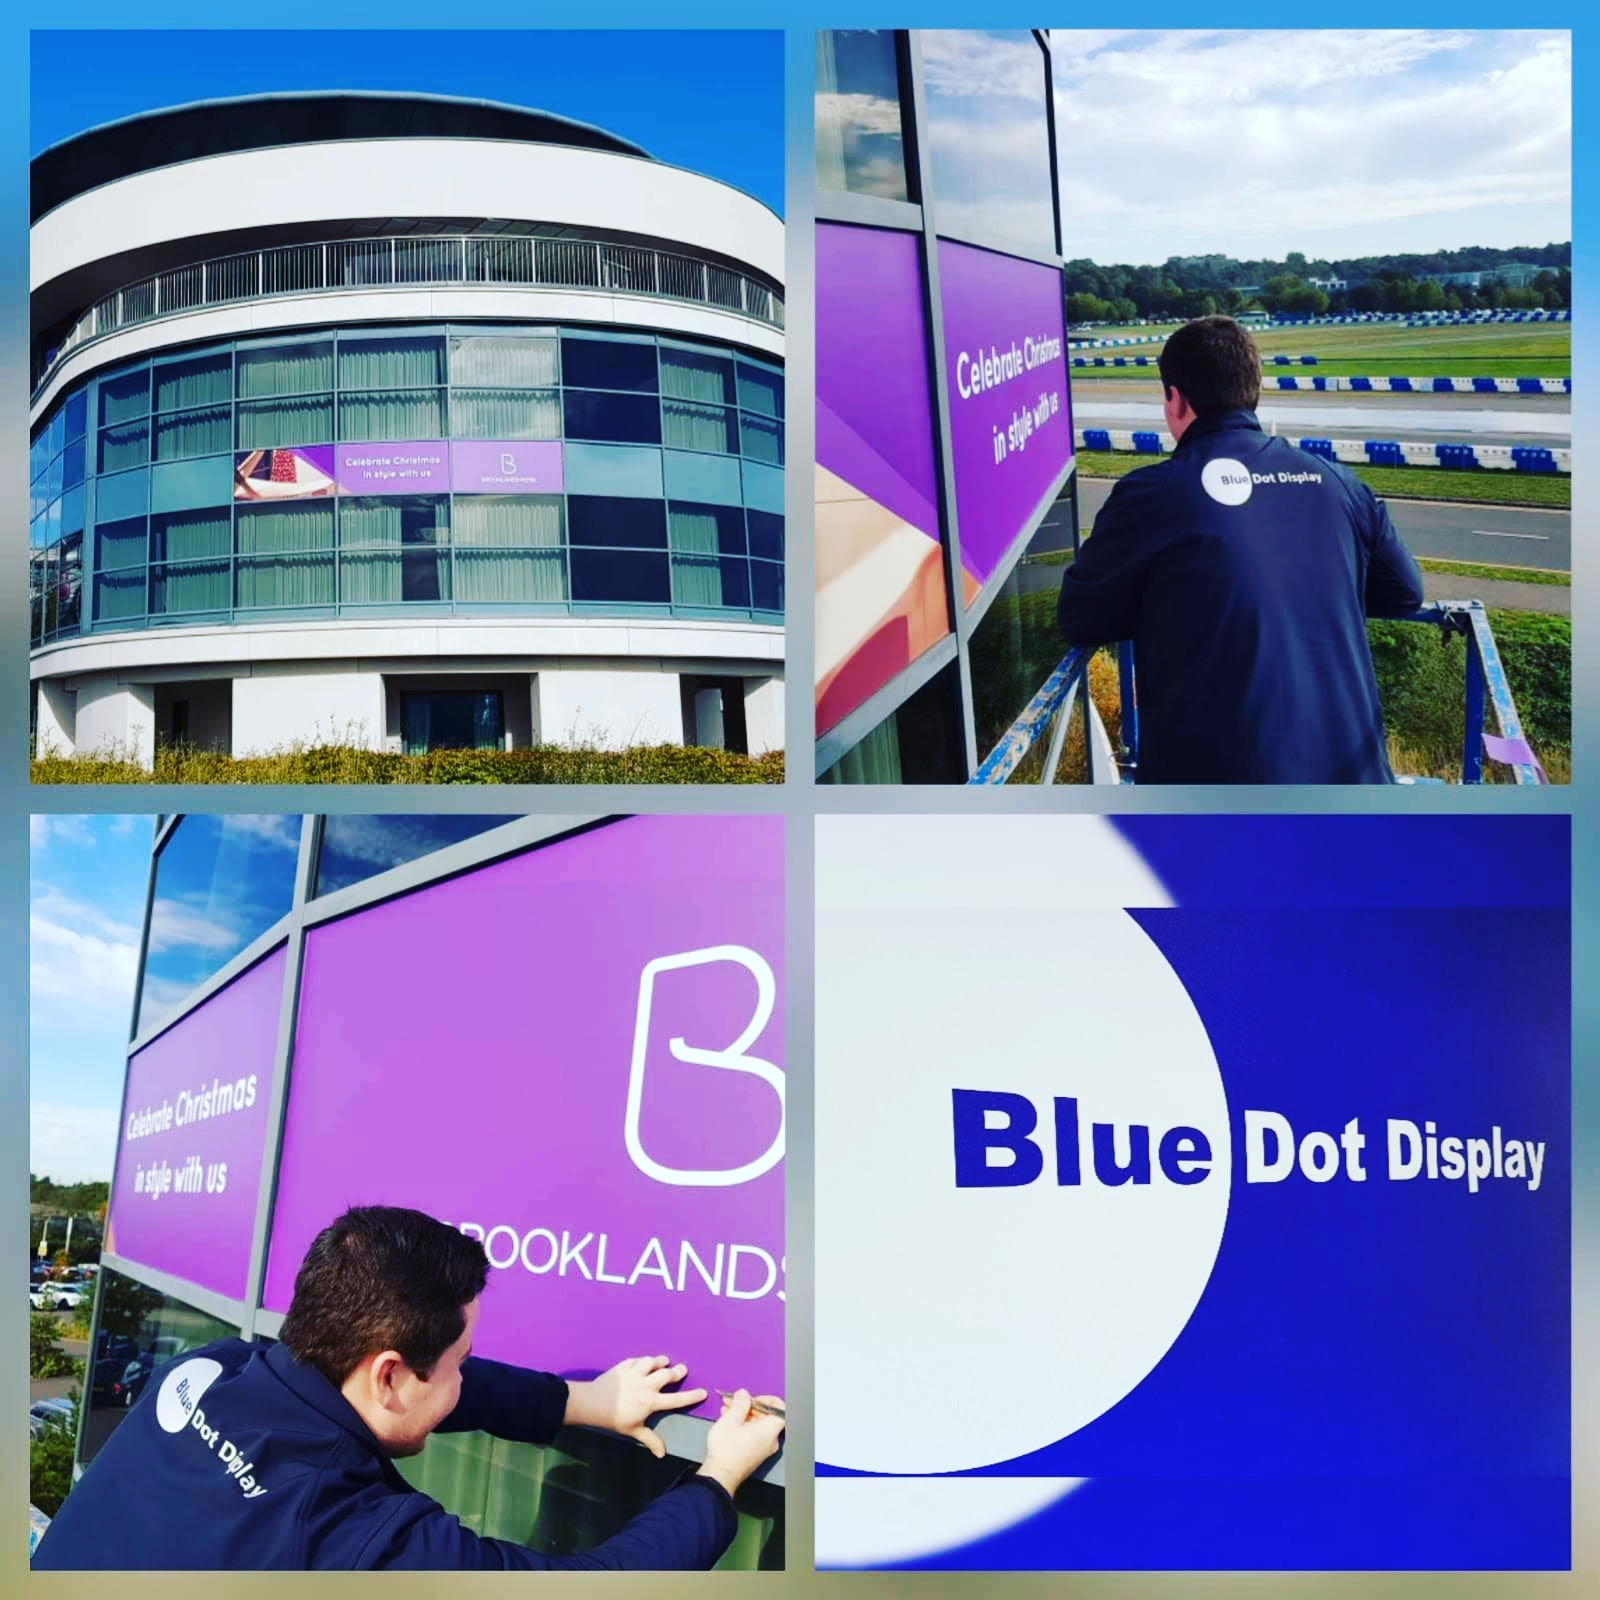 Vinyl lettering and window graphics being installed by Bluedot at Brooklands in Surrey